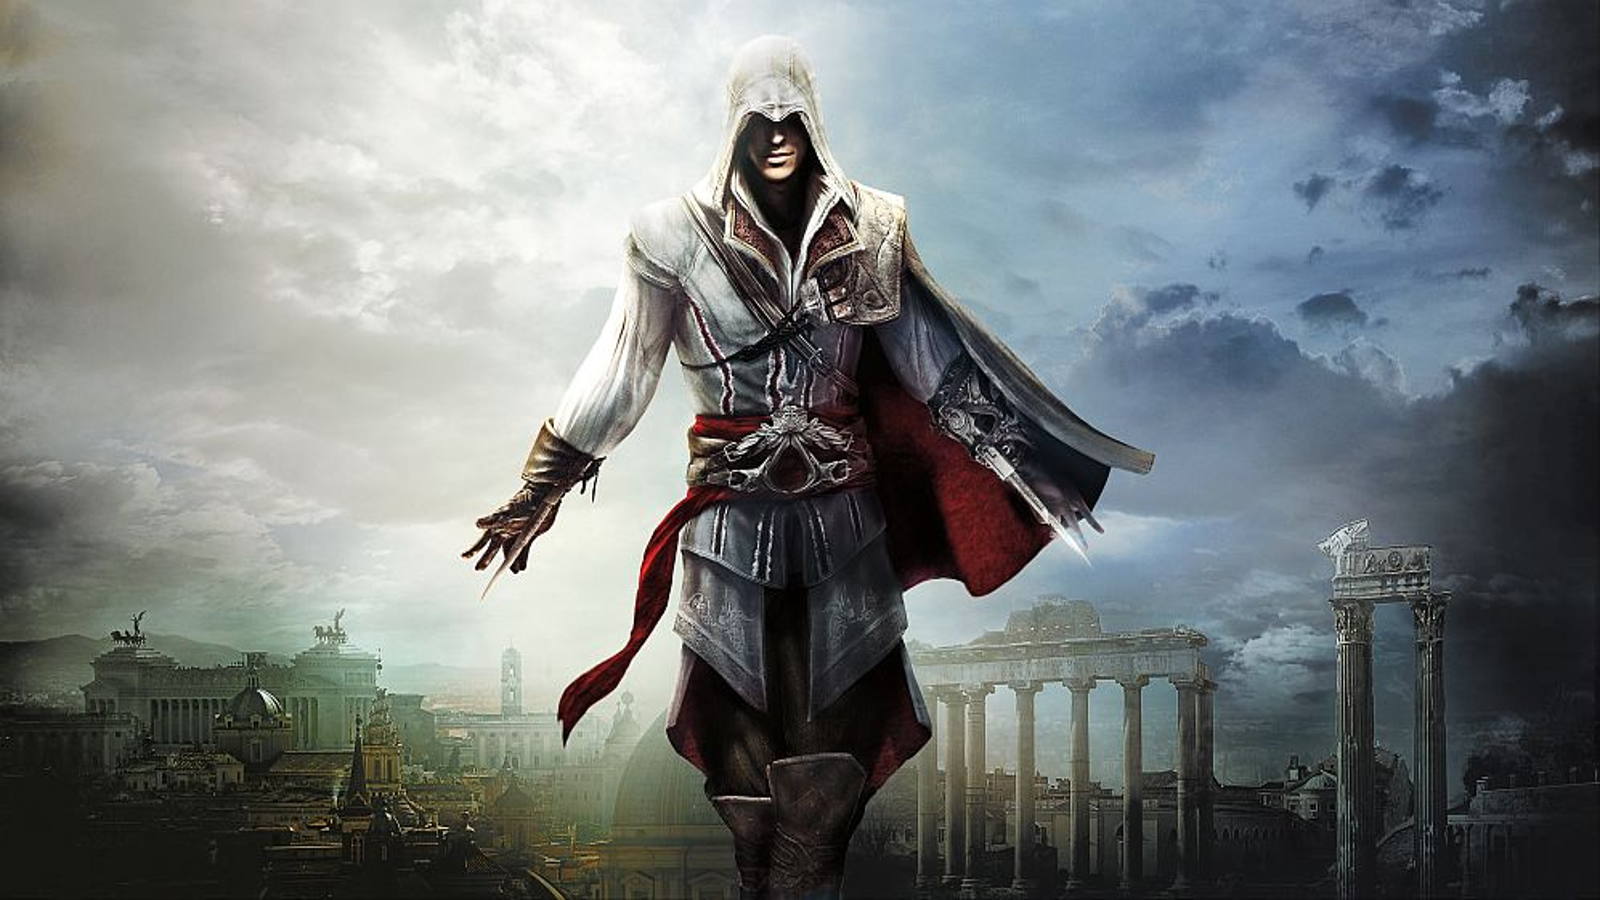 Ubisoft patched out the weird Assassin's Creed 2 NPC face that went viral